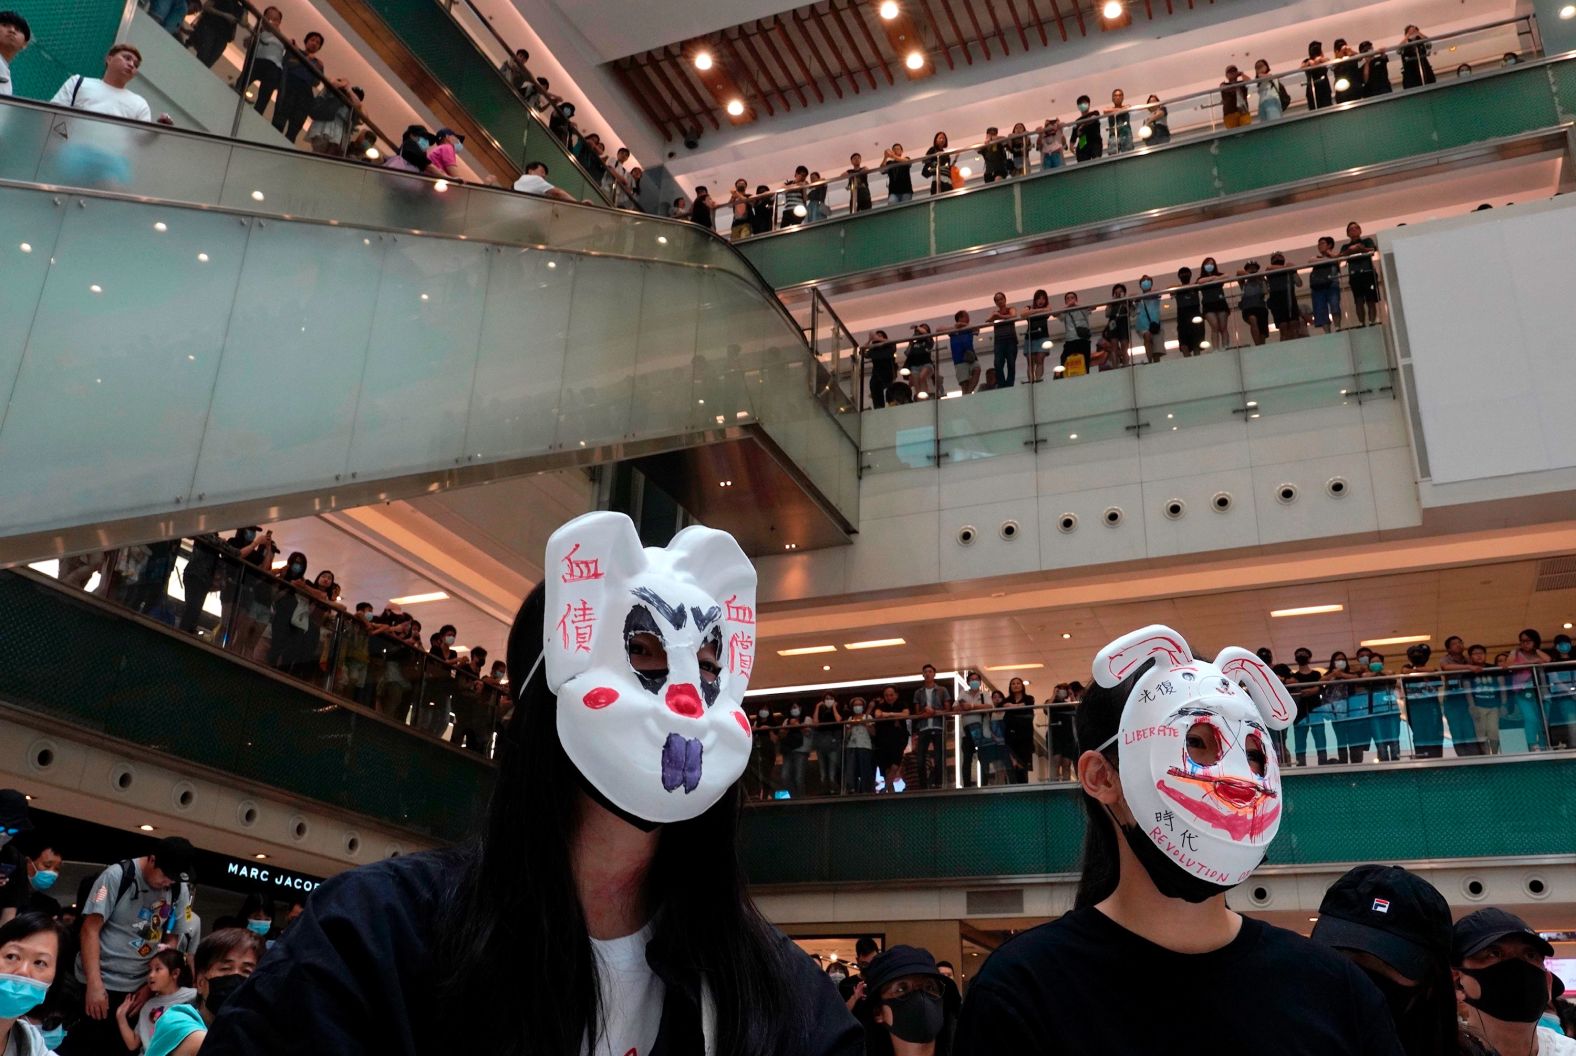 Protesters wearing masks in defiance of <a href="https://www.cnn.com/2019/10/04/asia/hong-kong-face-mask-ban-meeting-intl-hnk/index.html" target="_blank">a recently imposed ban</a> gather at a shopping mall on October 13.